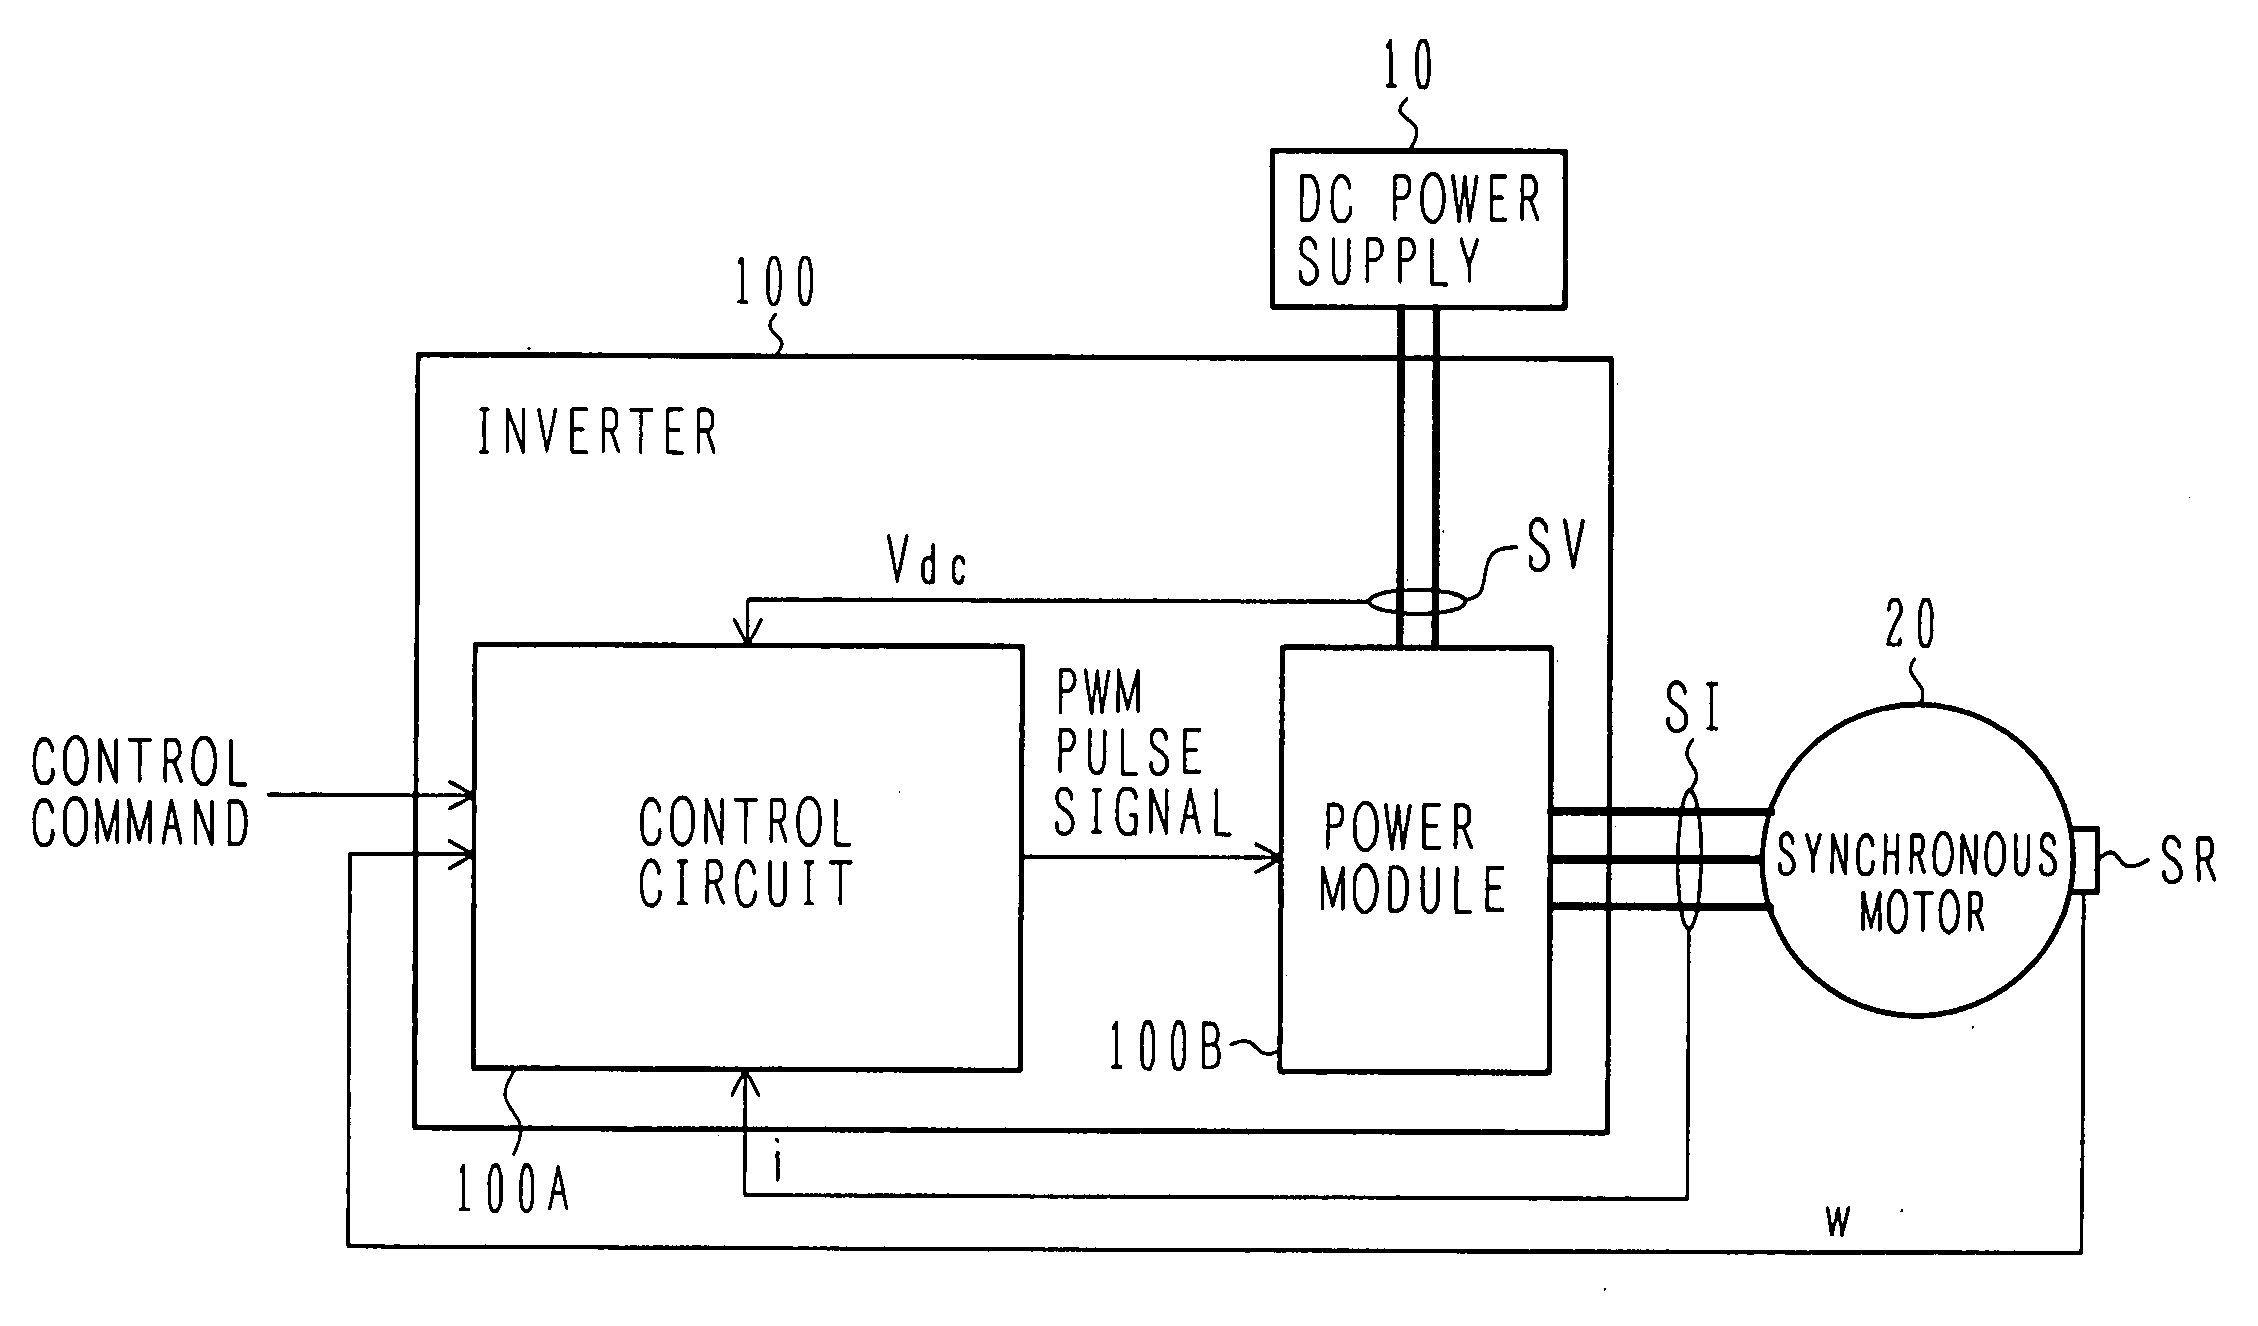 Electric power converter and motor driving system